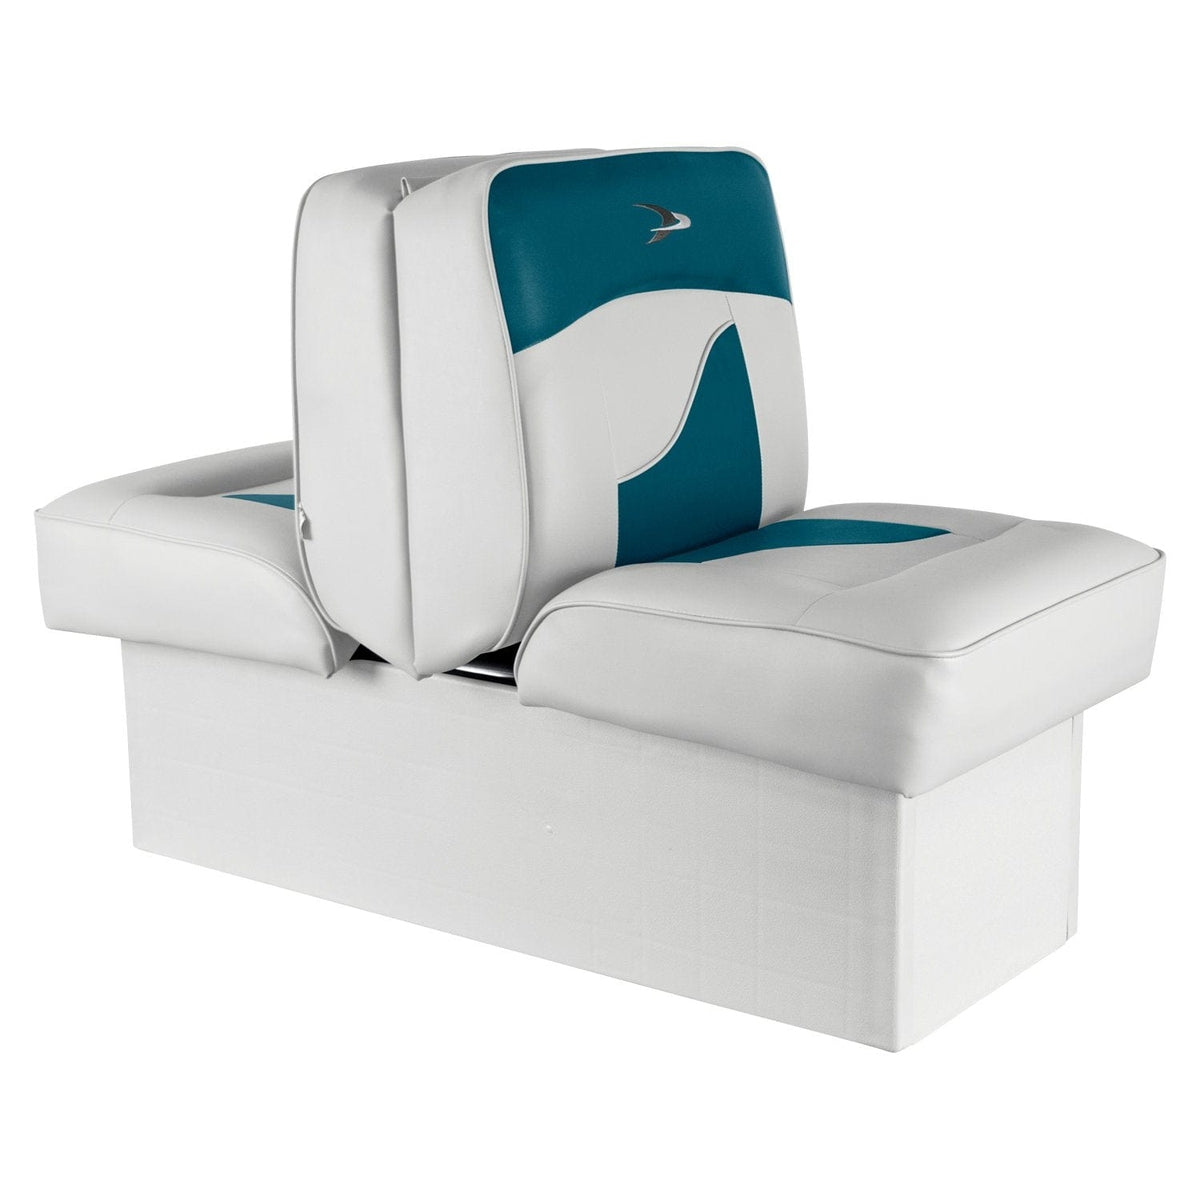 Wise Oversized - Not Qualified for Free Shipping Wise Back-to-Back Lounge Seat White/Teal #8WD1033-0033